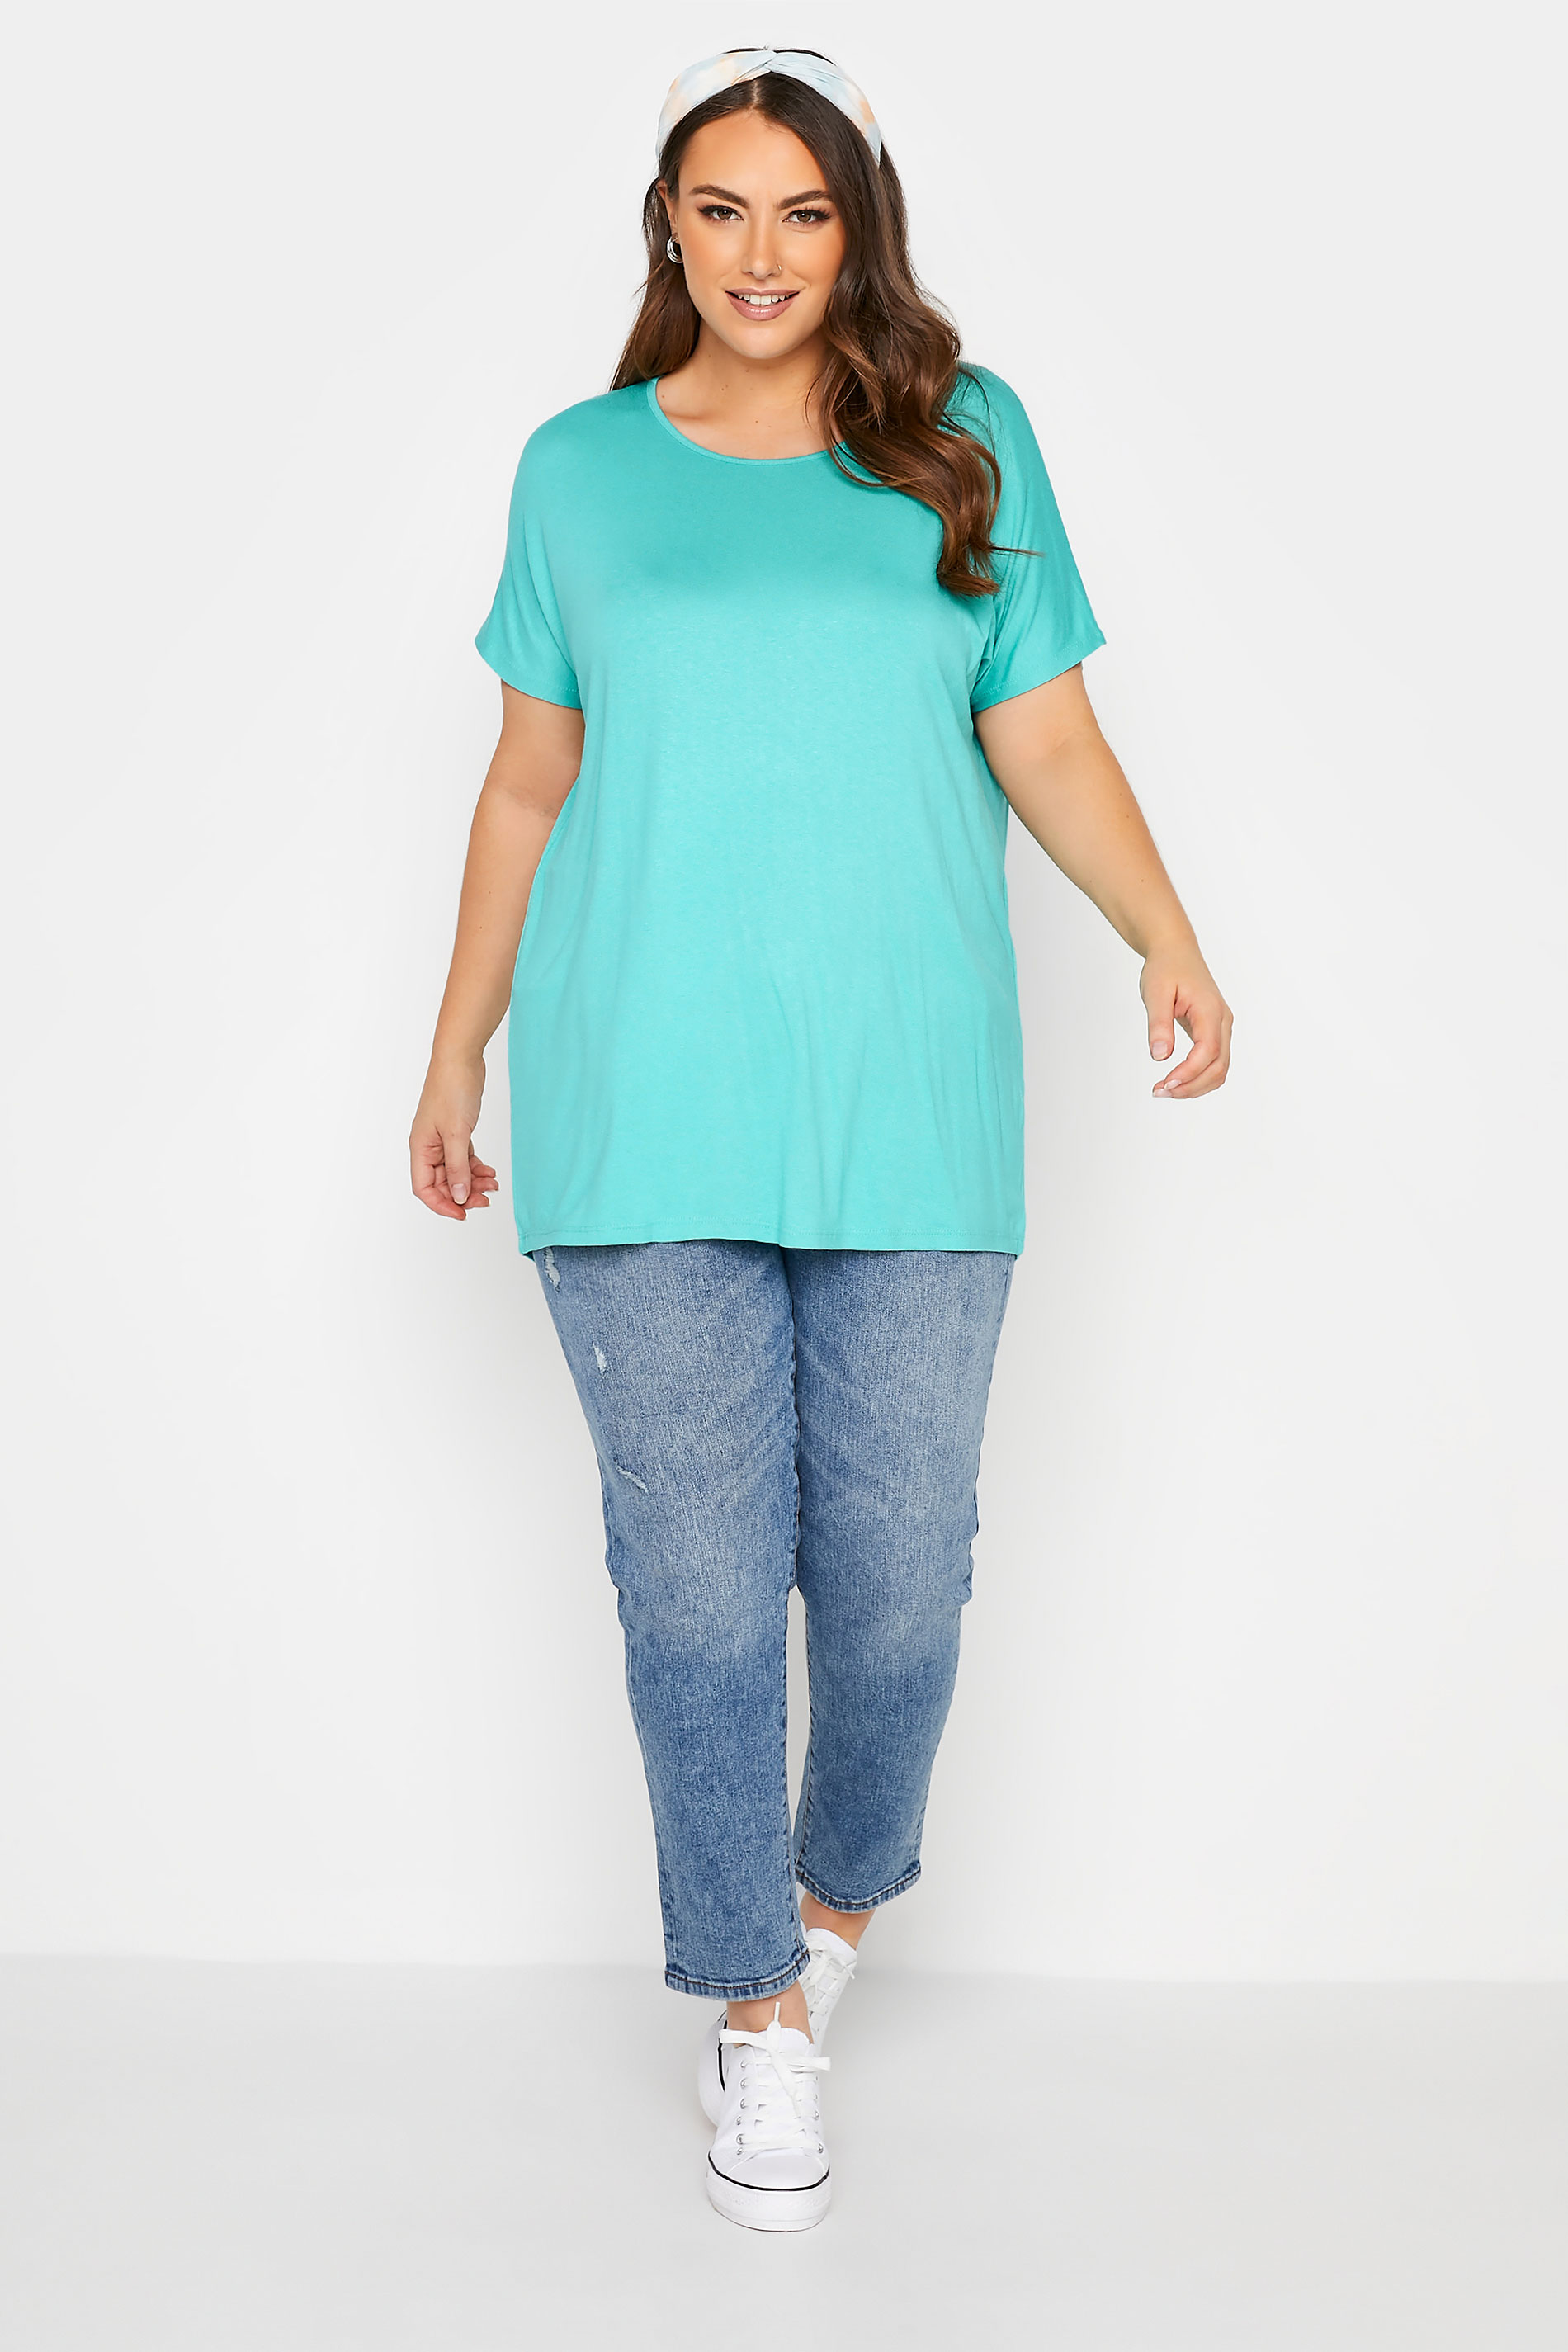 Grande taille  Tops Grande taille  T-Shirts | T-Shirt Bleu Turquoise Manches Courtes en Jersey - AT85166